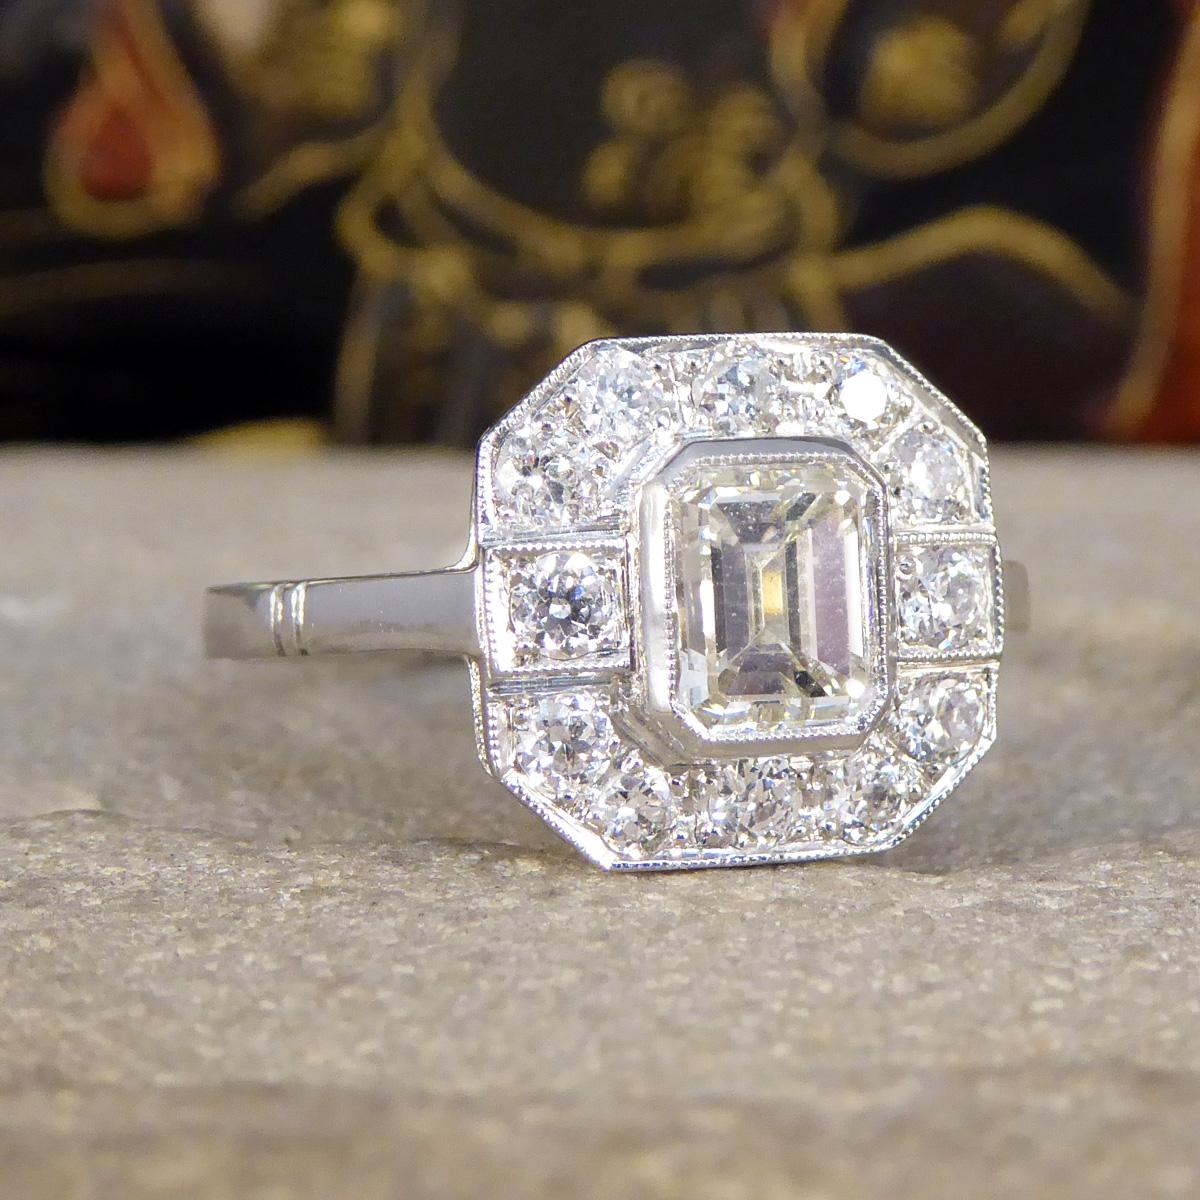 This beautiful contemporary ring has been hand crafted from Platinum in an Art Deco style. It features a centre Emerald Cut Diamond in a millegrain edge setting weighing 1.00ct with a slight colour draw giving it an almost champagne light lemon